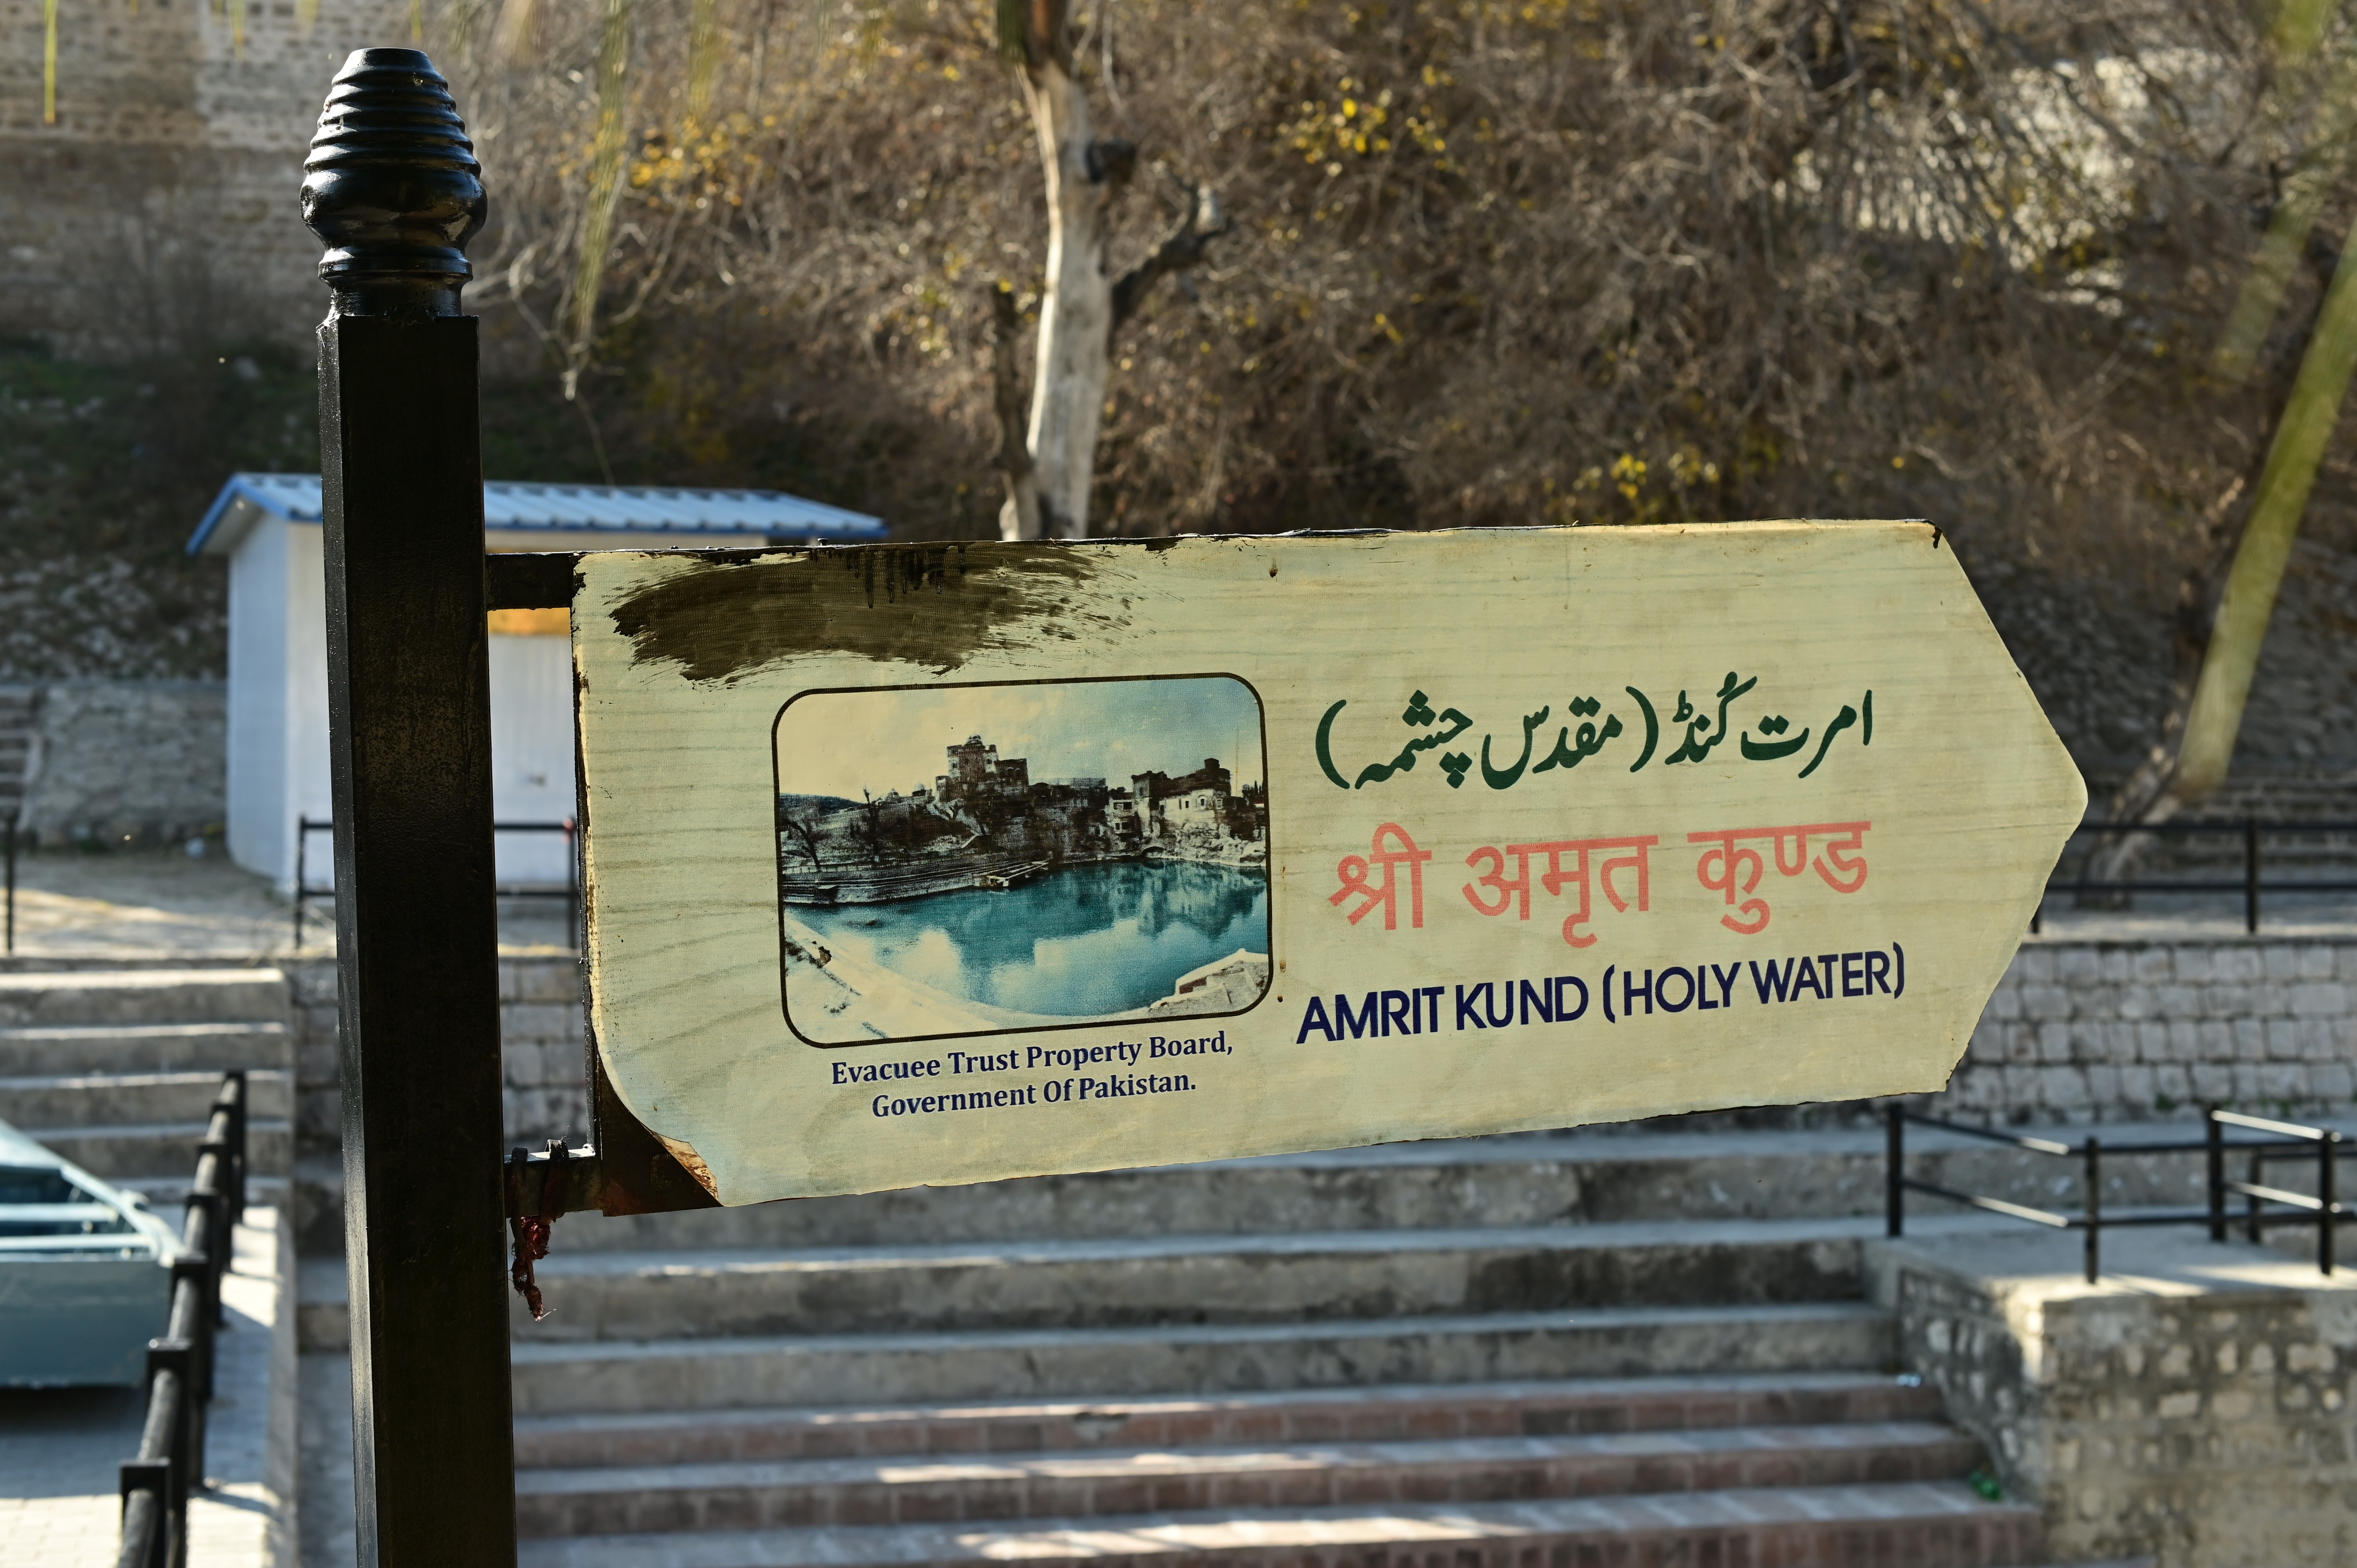 The Direction board indicating the location of Amrit Kund sacred pond that surrounds all the temples at Katas Raj